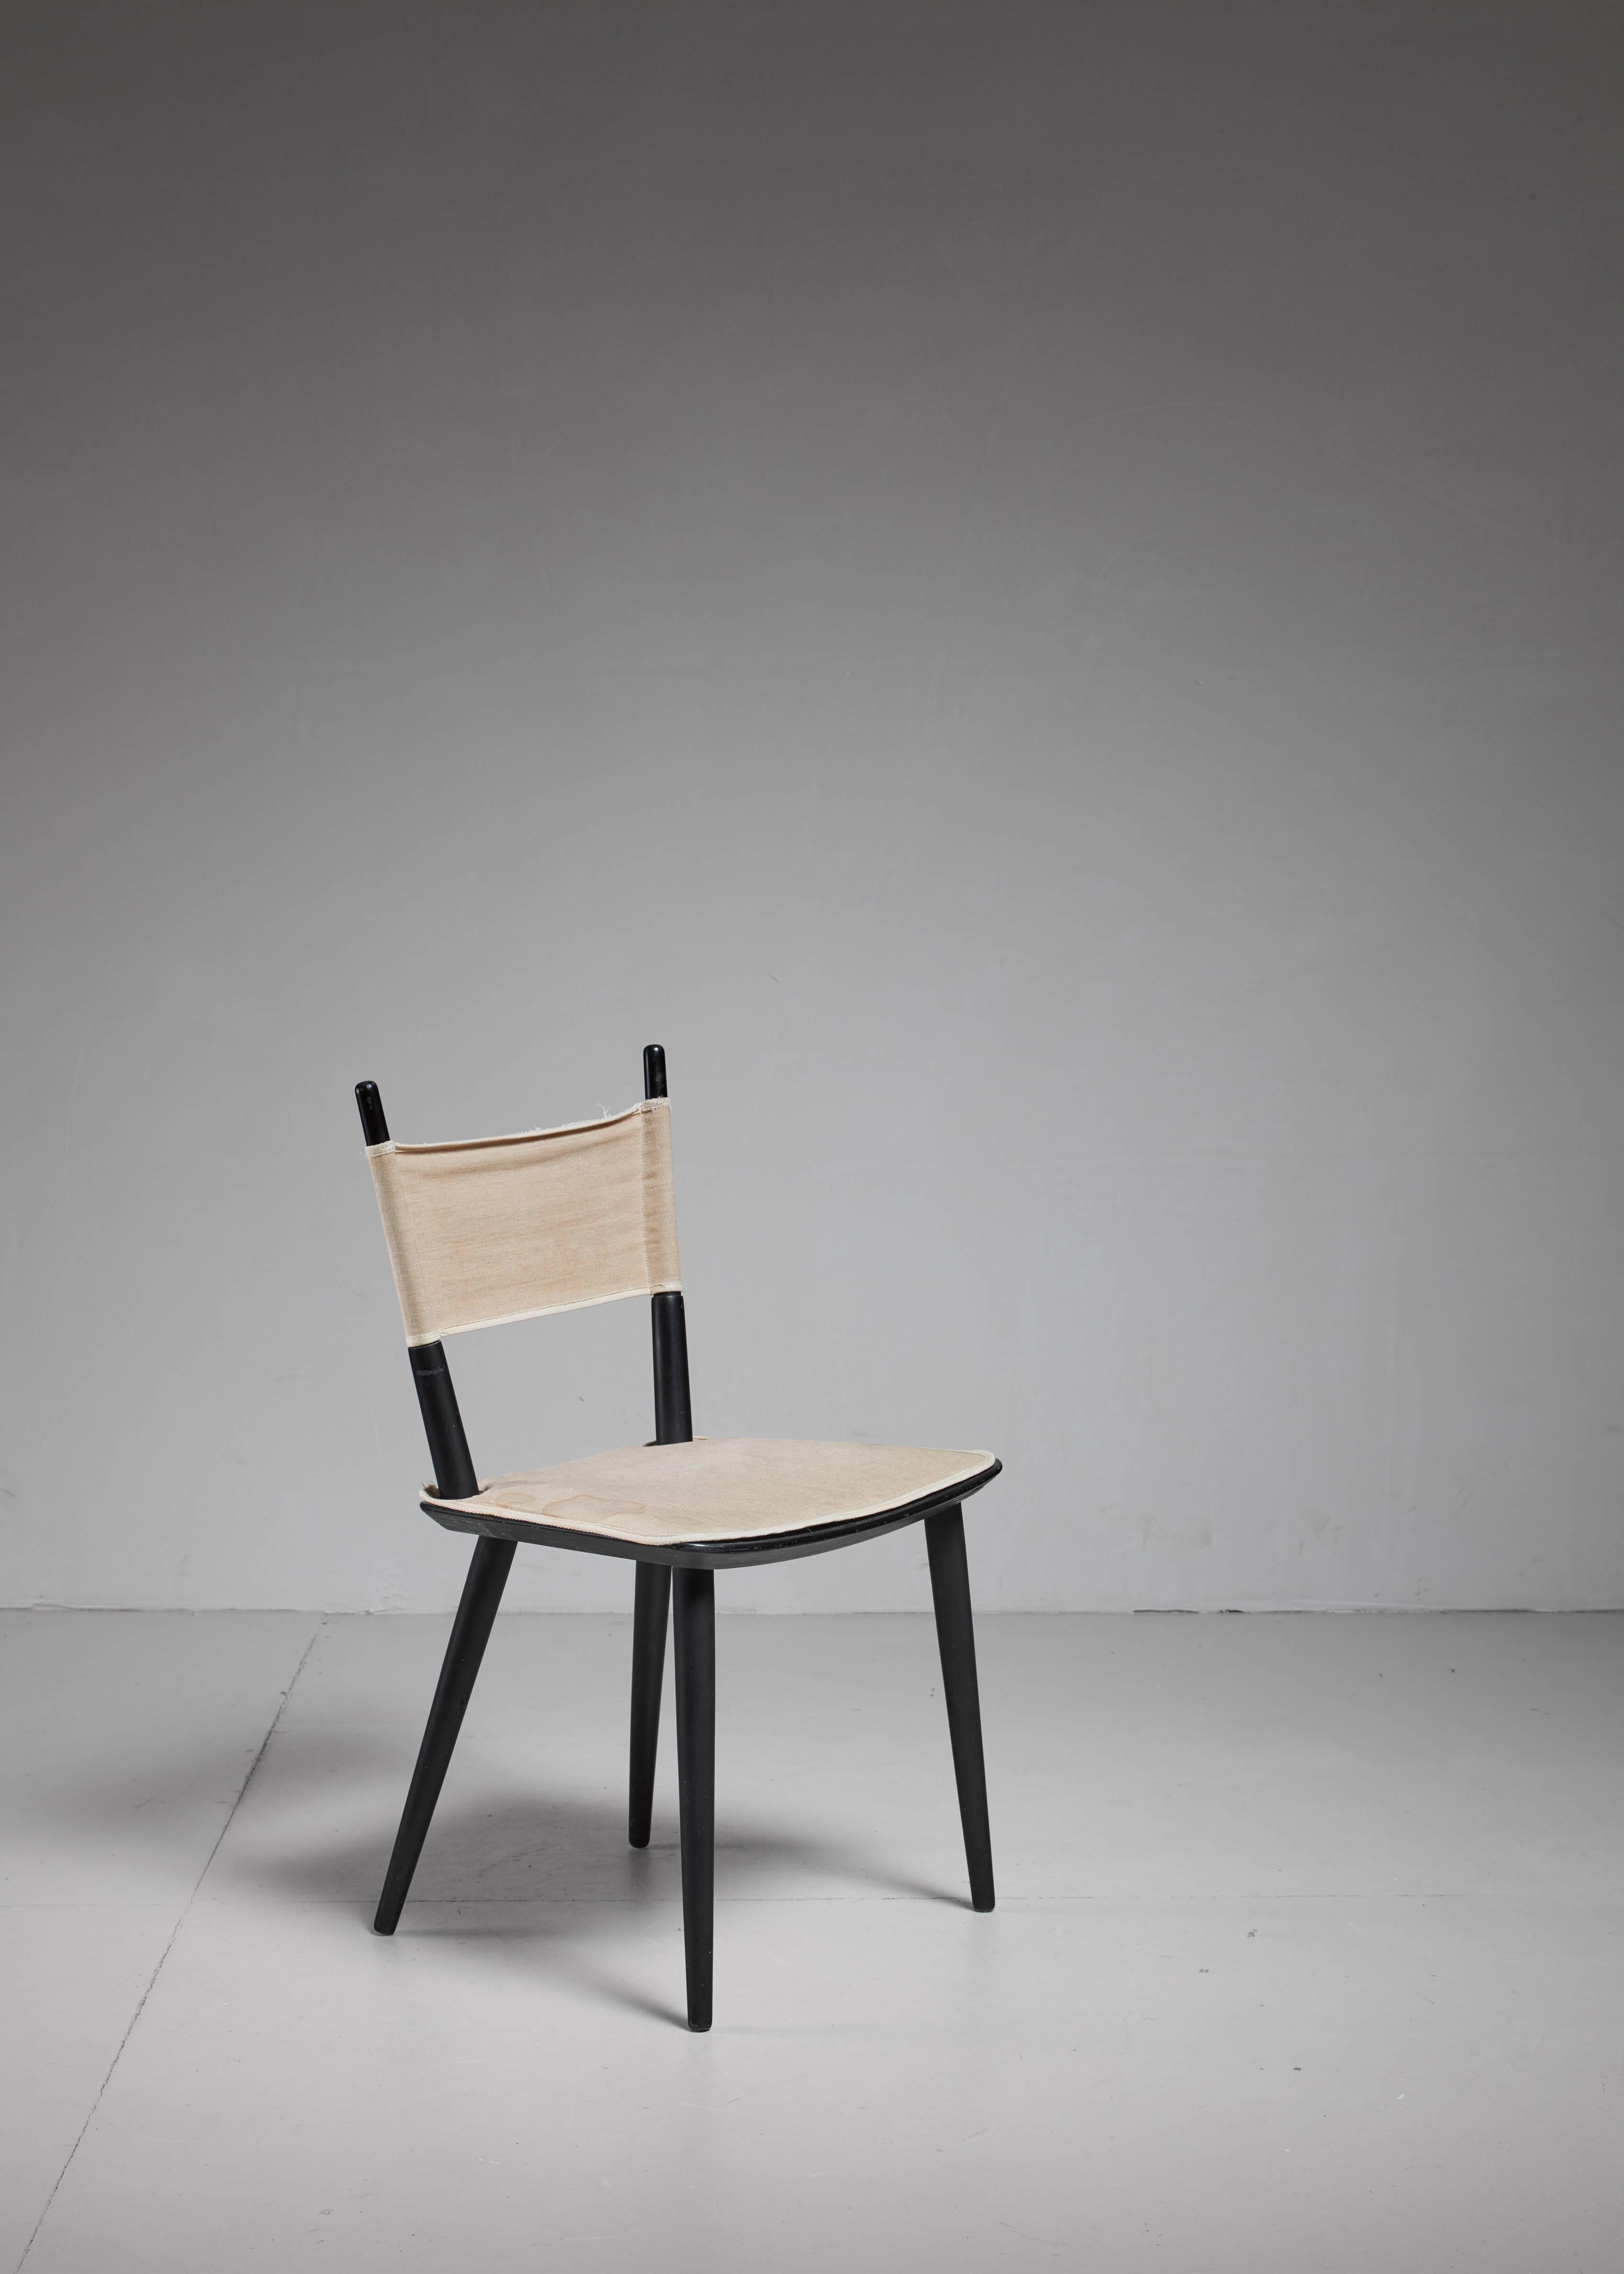 A rare and original model J108 side chair, designed in the 1950s by Jorgen Baekmark for FDB Møbler. The chair is made of a black lacquered beech frame with a canvas seat pad and backrest. This lightweight chair can easily be disassembled. The chair